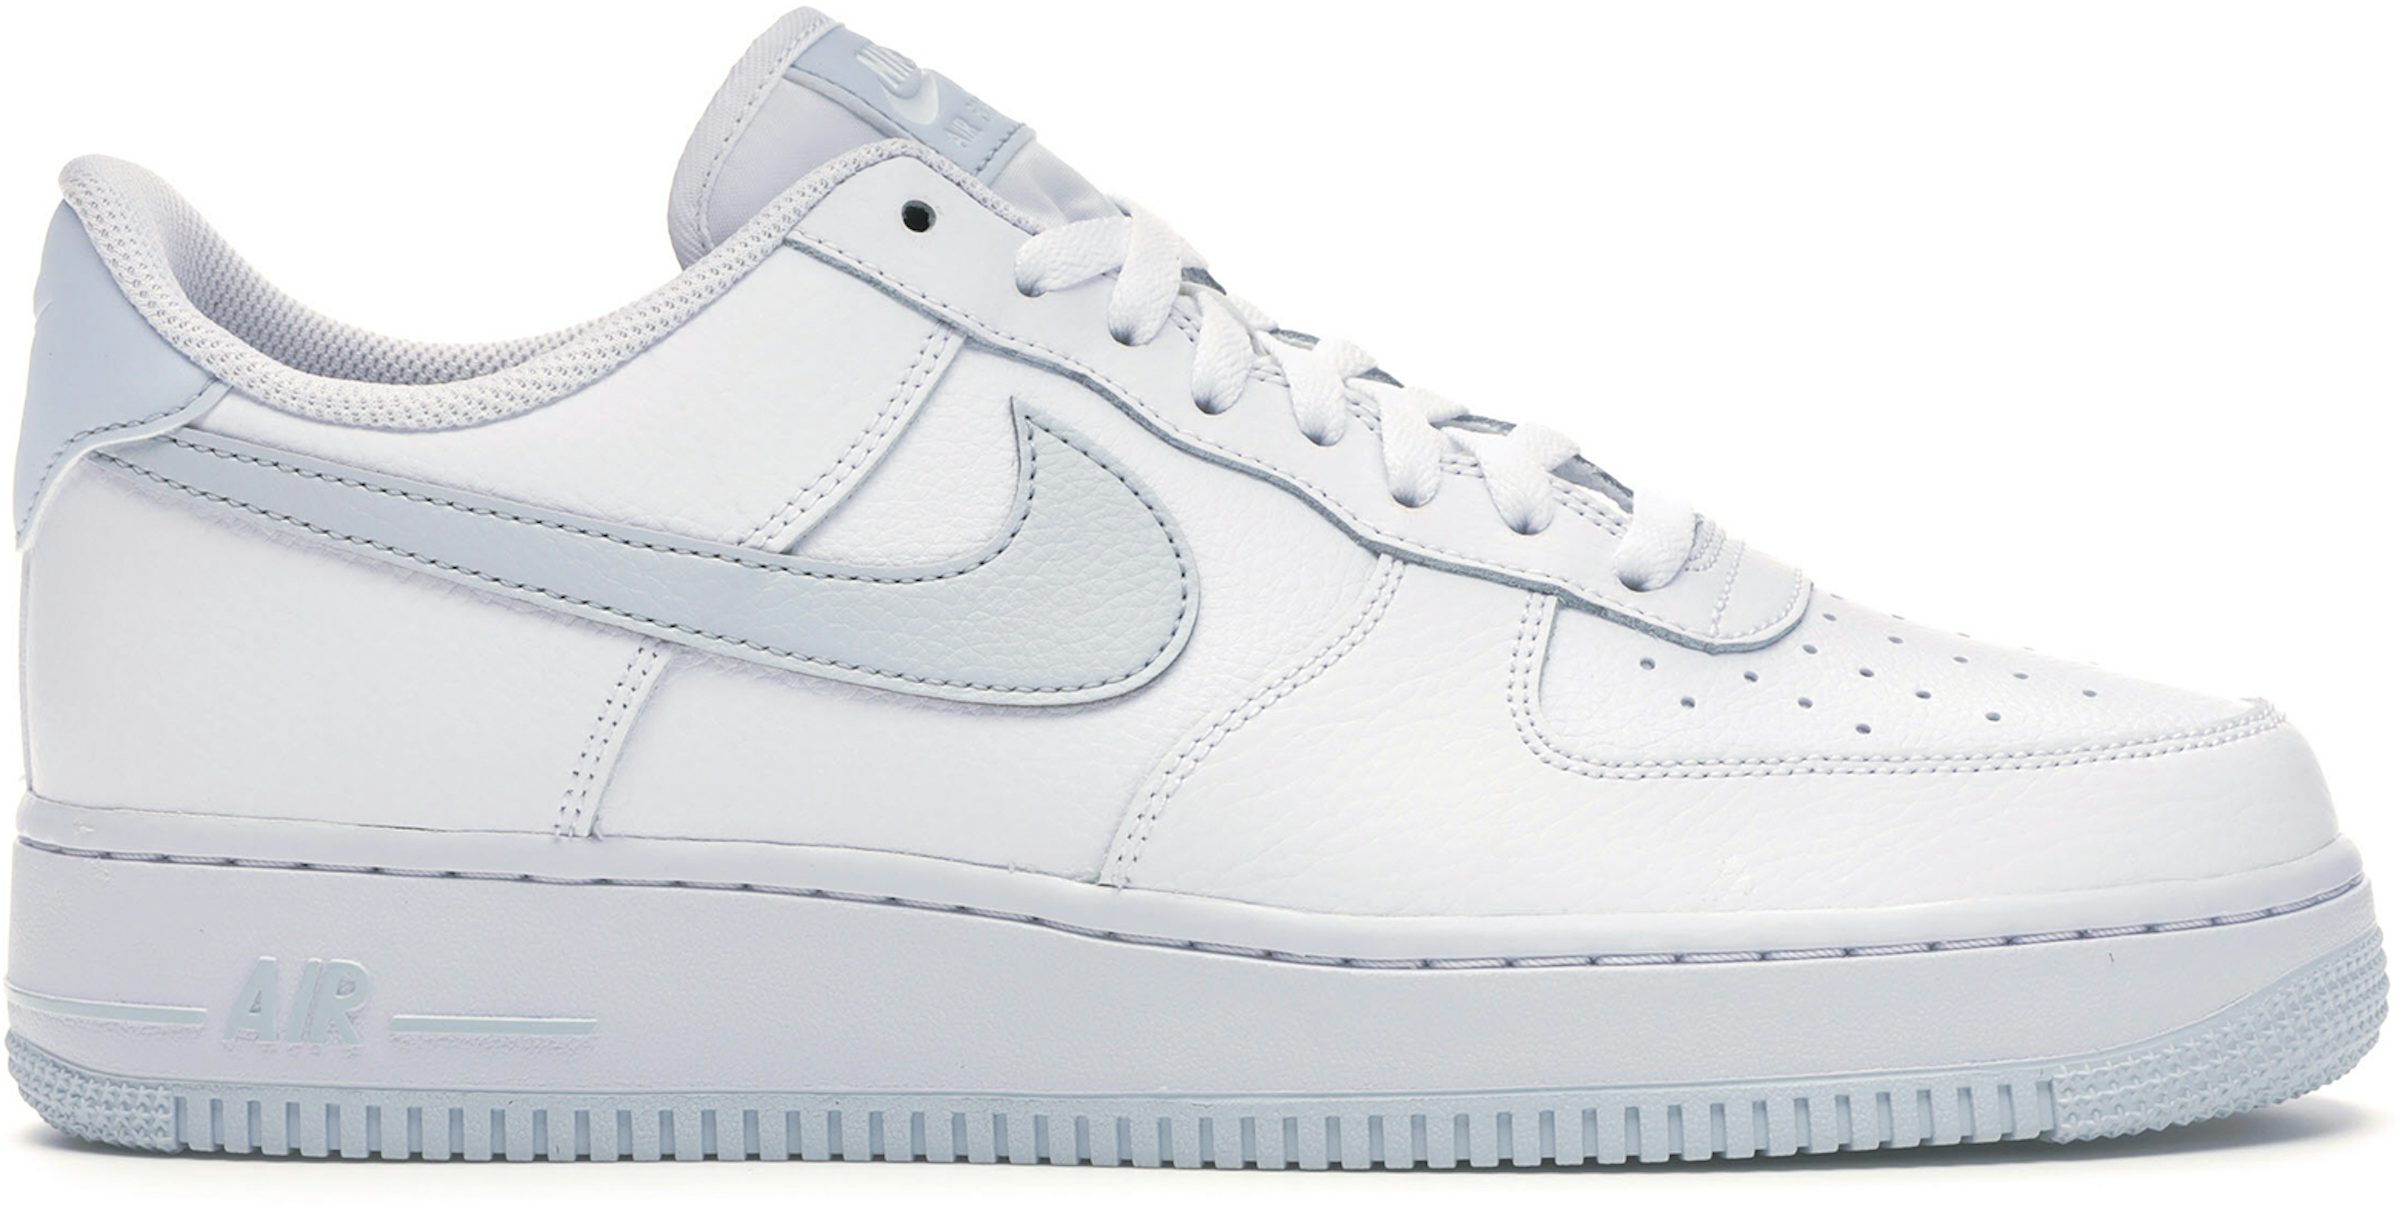 Neon Hits Land On The Nike Air Force 1 Low Worldwide Pure Platinum